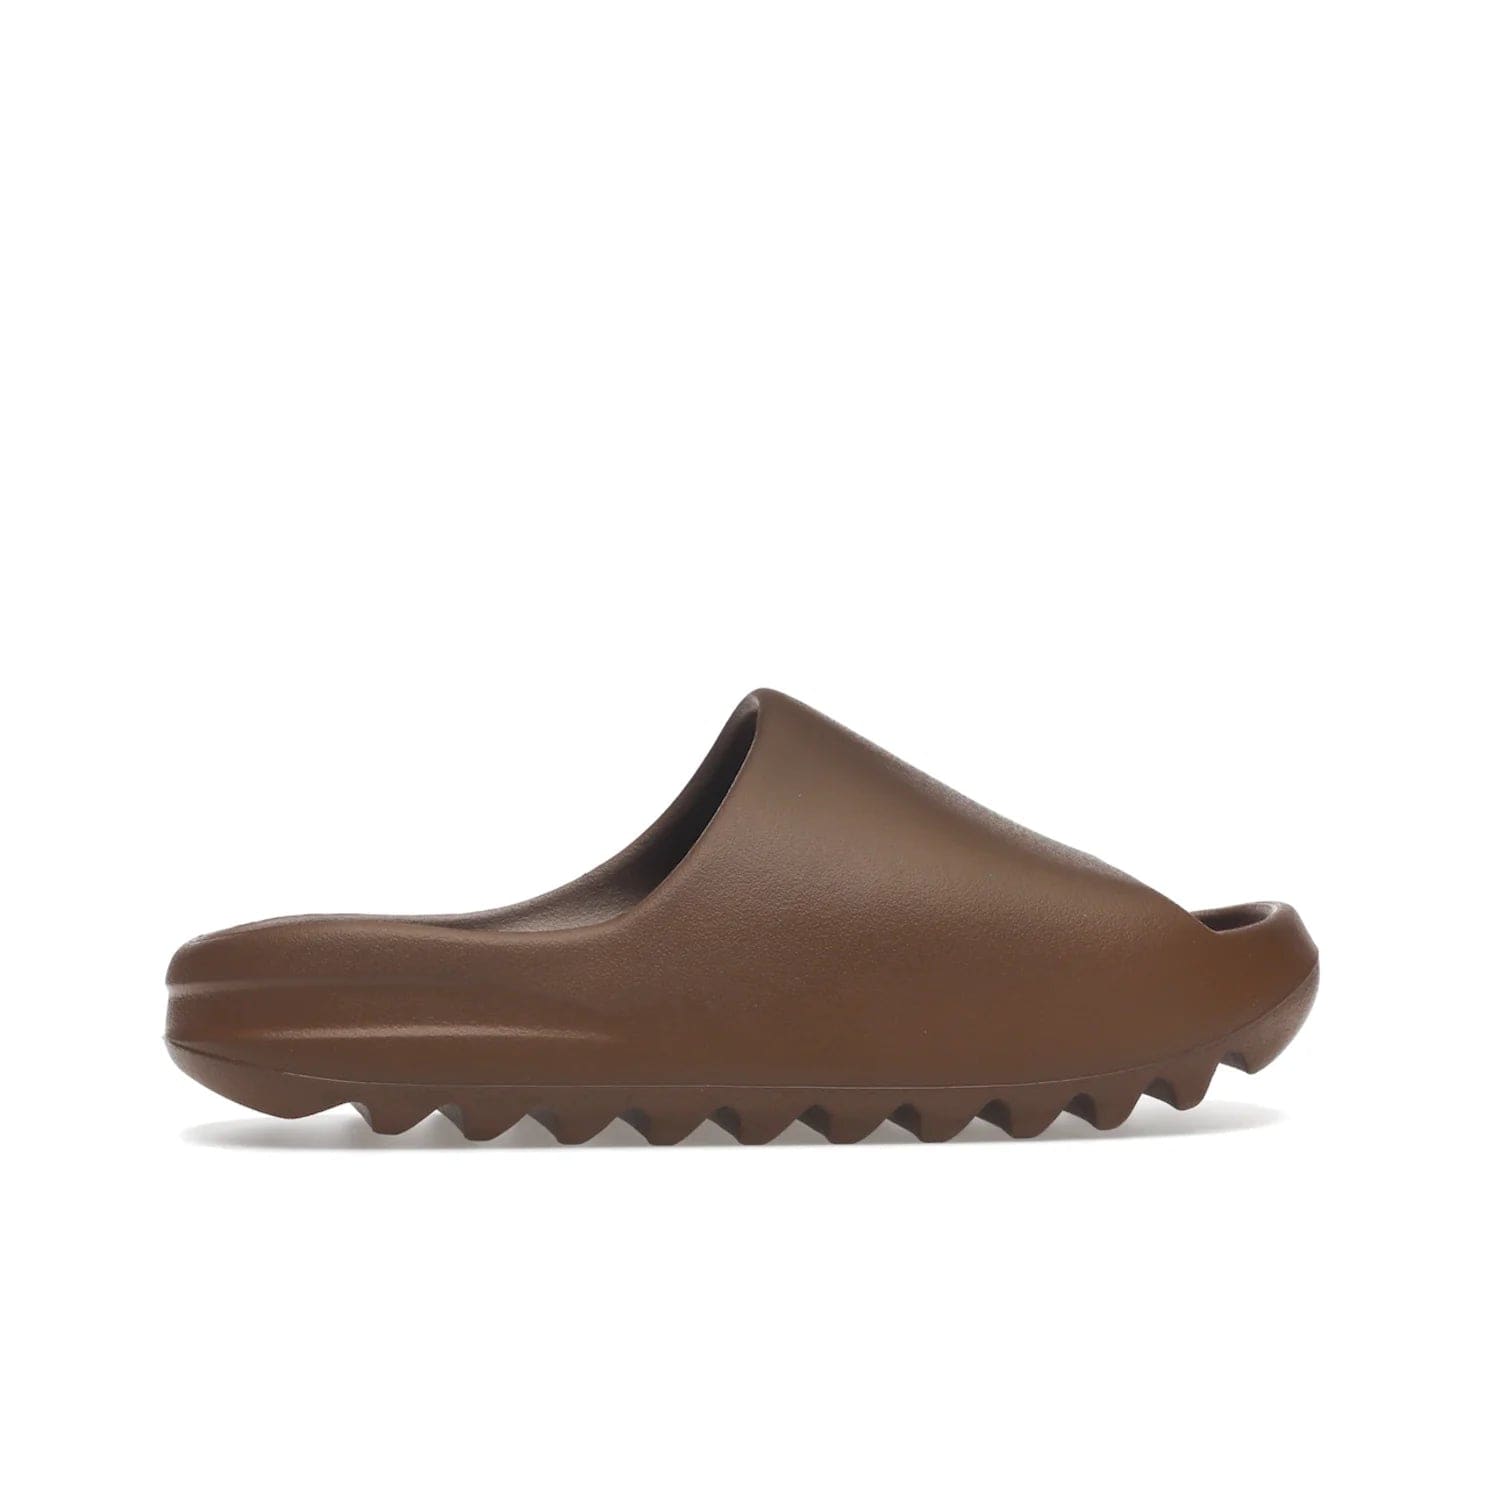 adidas Yeezy Slide Flax - Image 36 - Only at www.BallersClubKickz.com - Score the perfect casual look with the adidas Yeezy Slide Flax. Made with lightweight injected EVA plus horizontal grooves underfoot for traction. Release on August 22, 2022. $70.